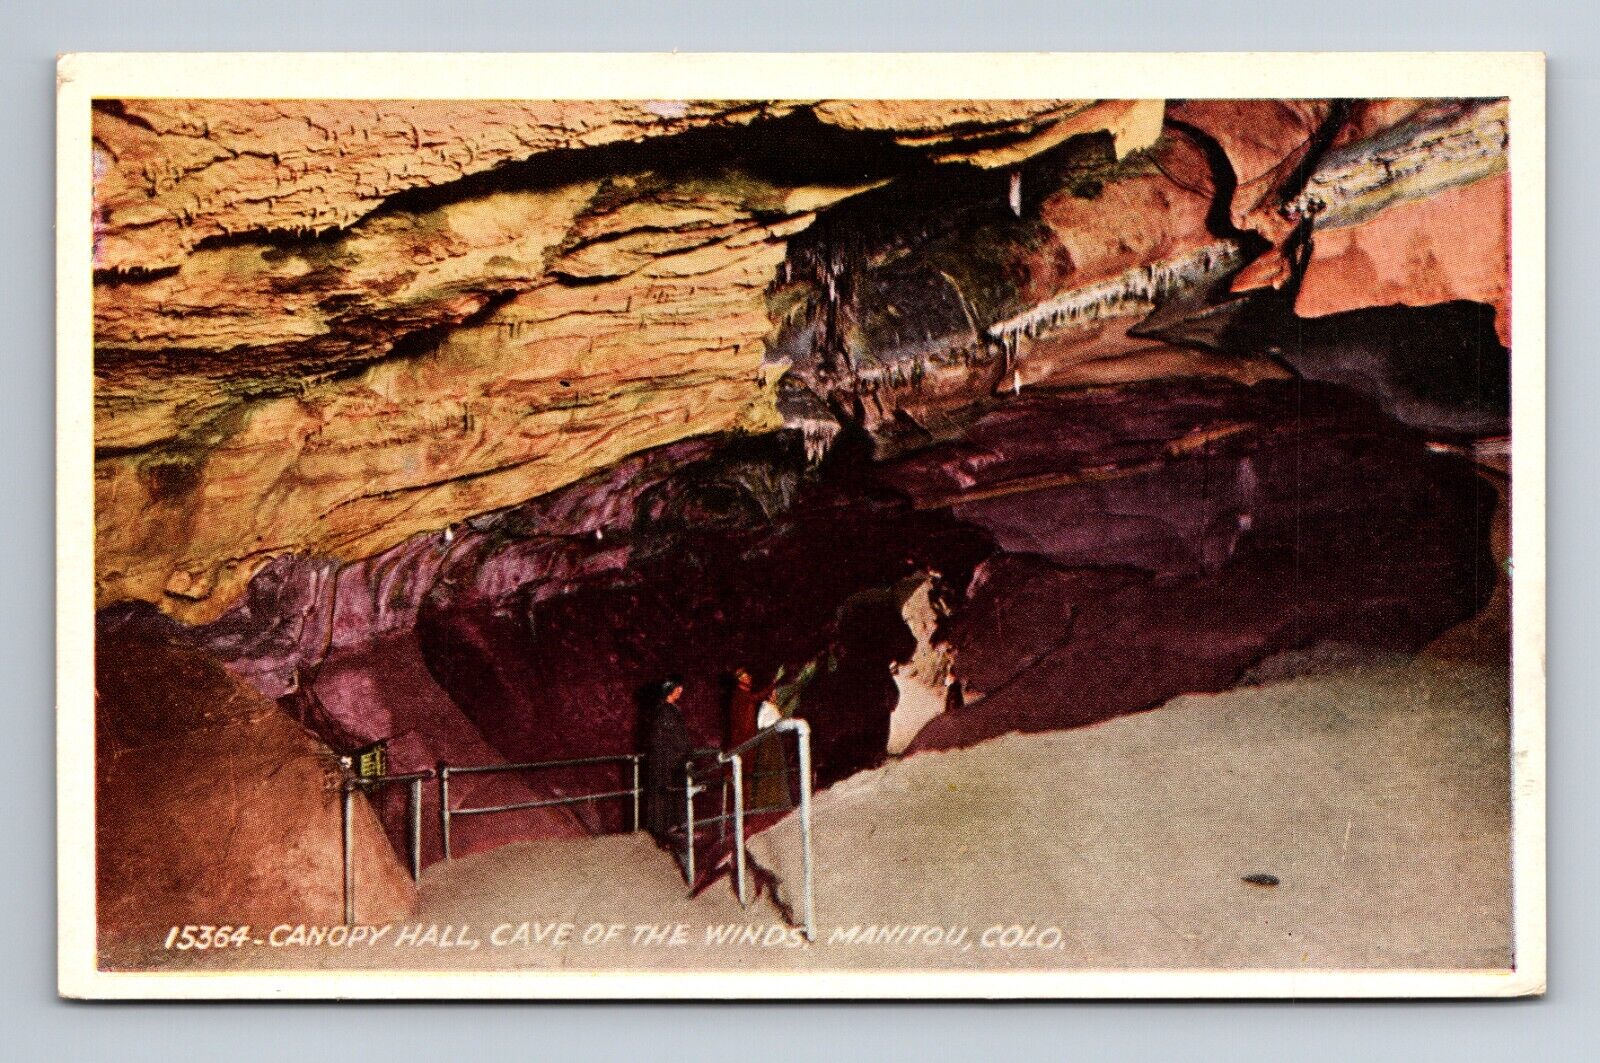 Canopy Hall Cave of the Winds Manitou Colorado Postcard c1925